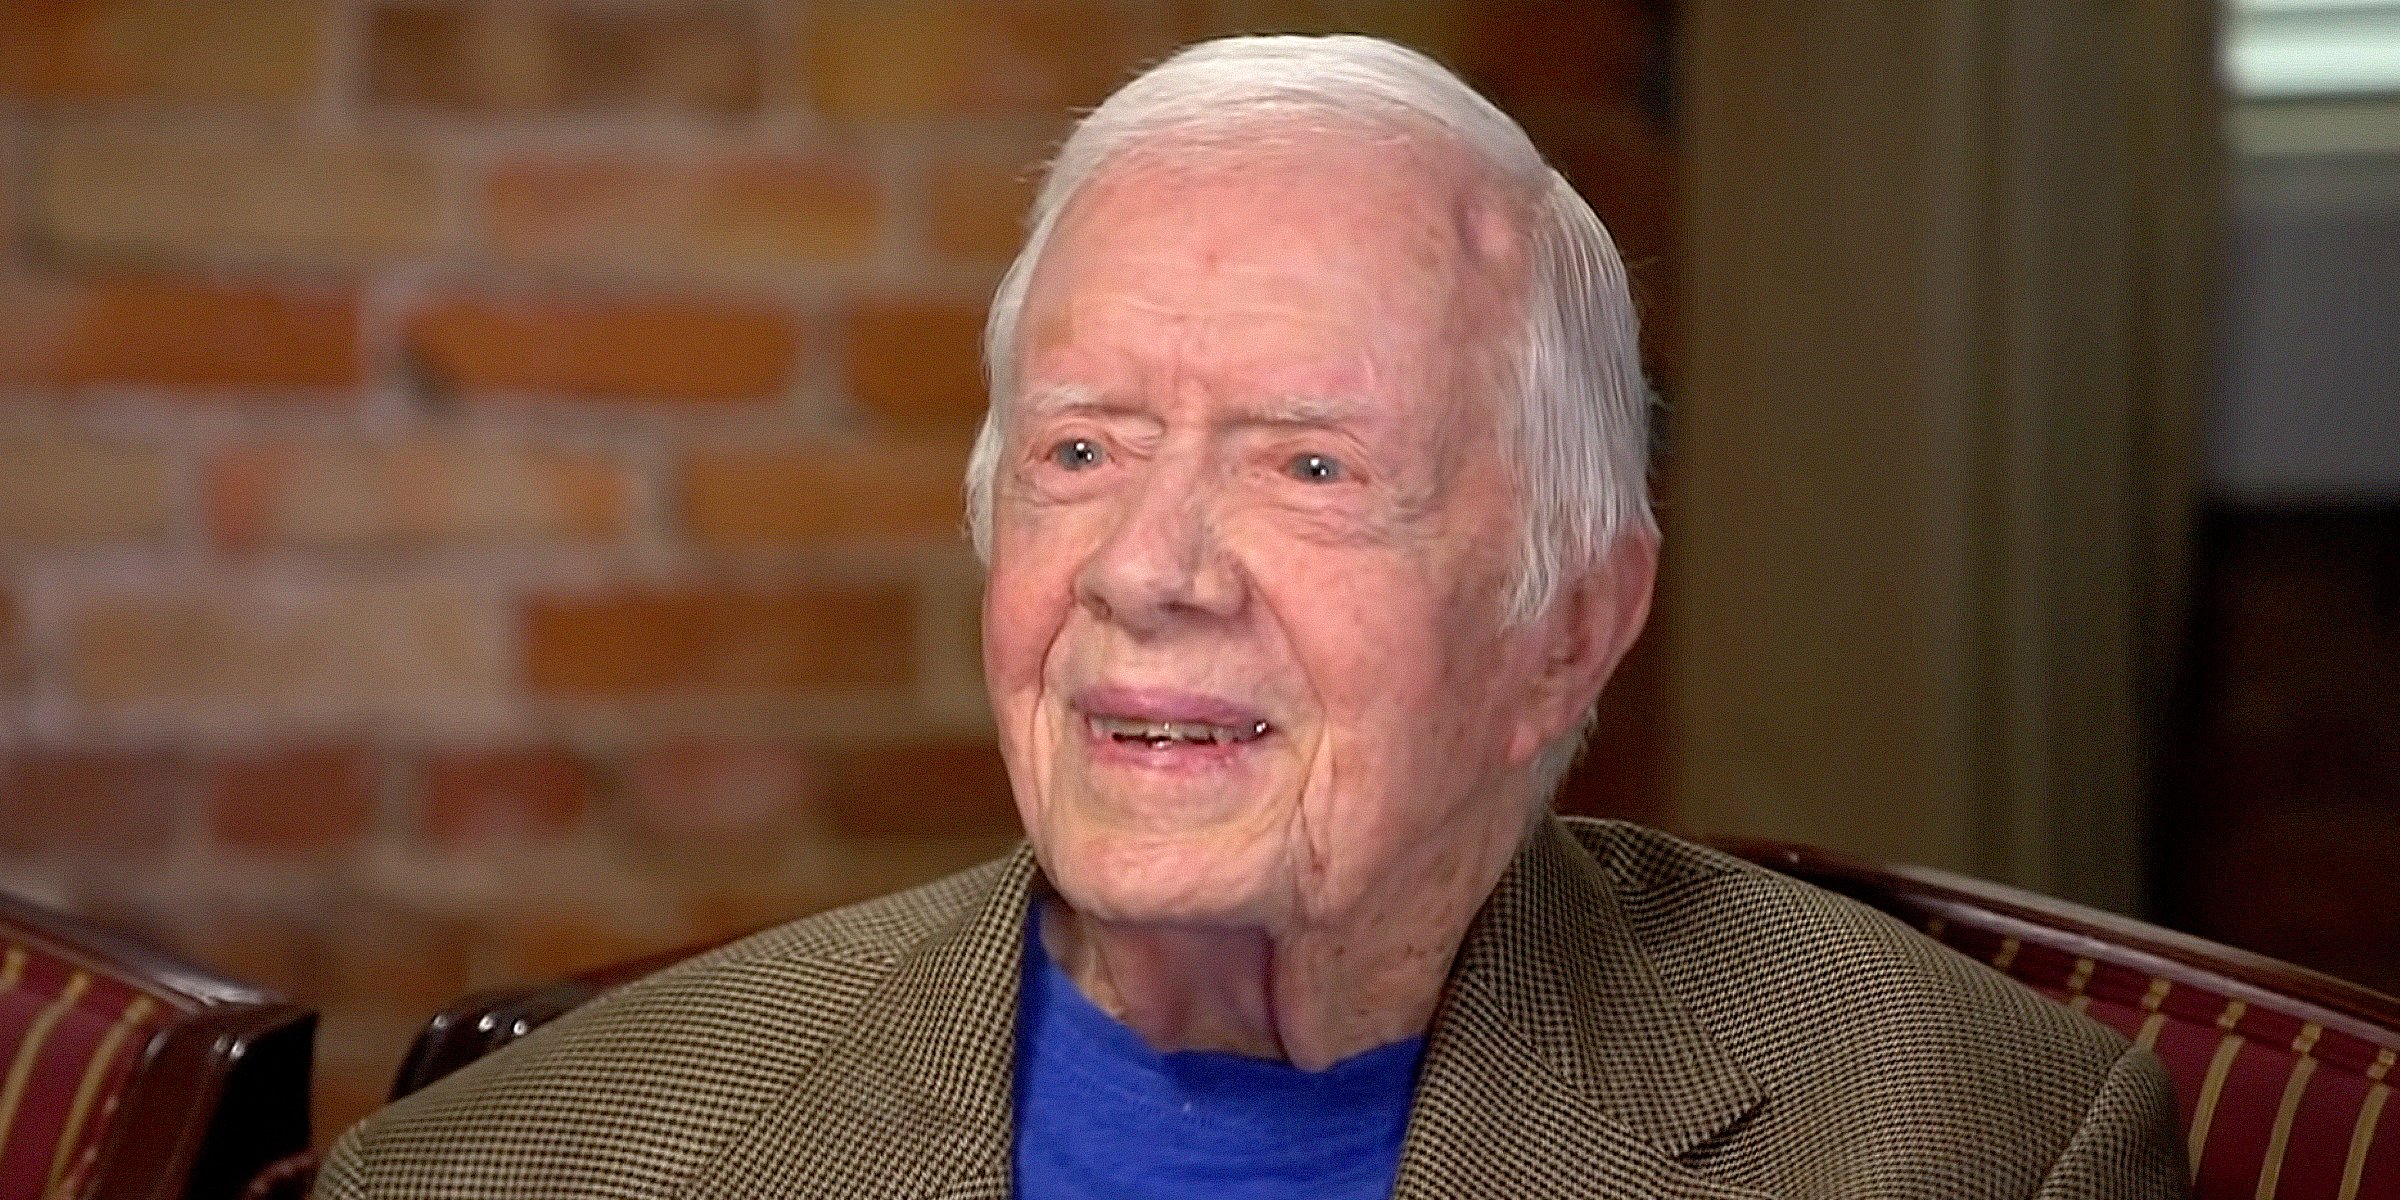 Jimmy Carter┃Source: YouTube@PBS News Hour